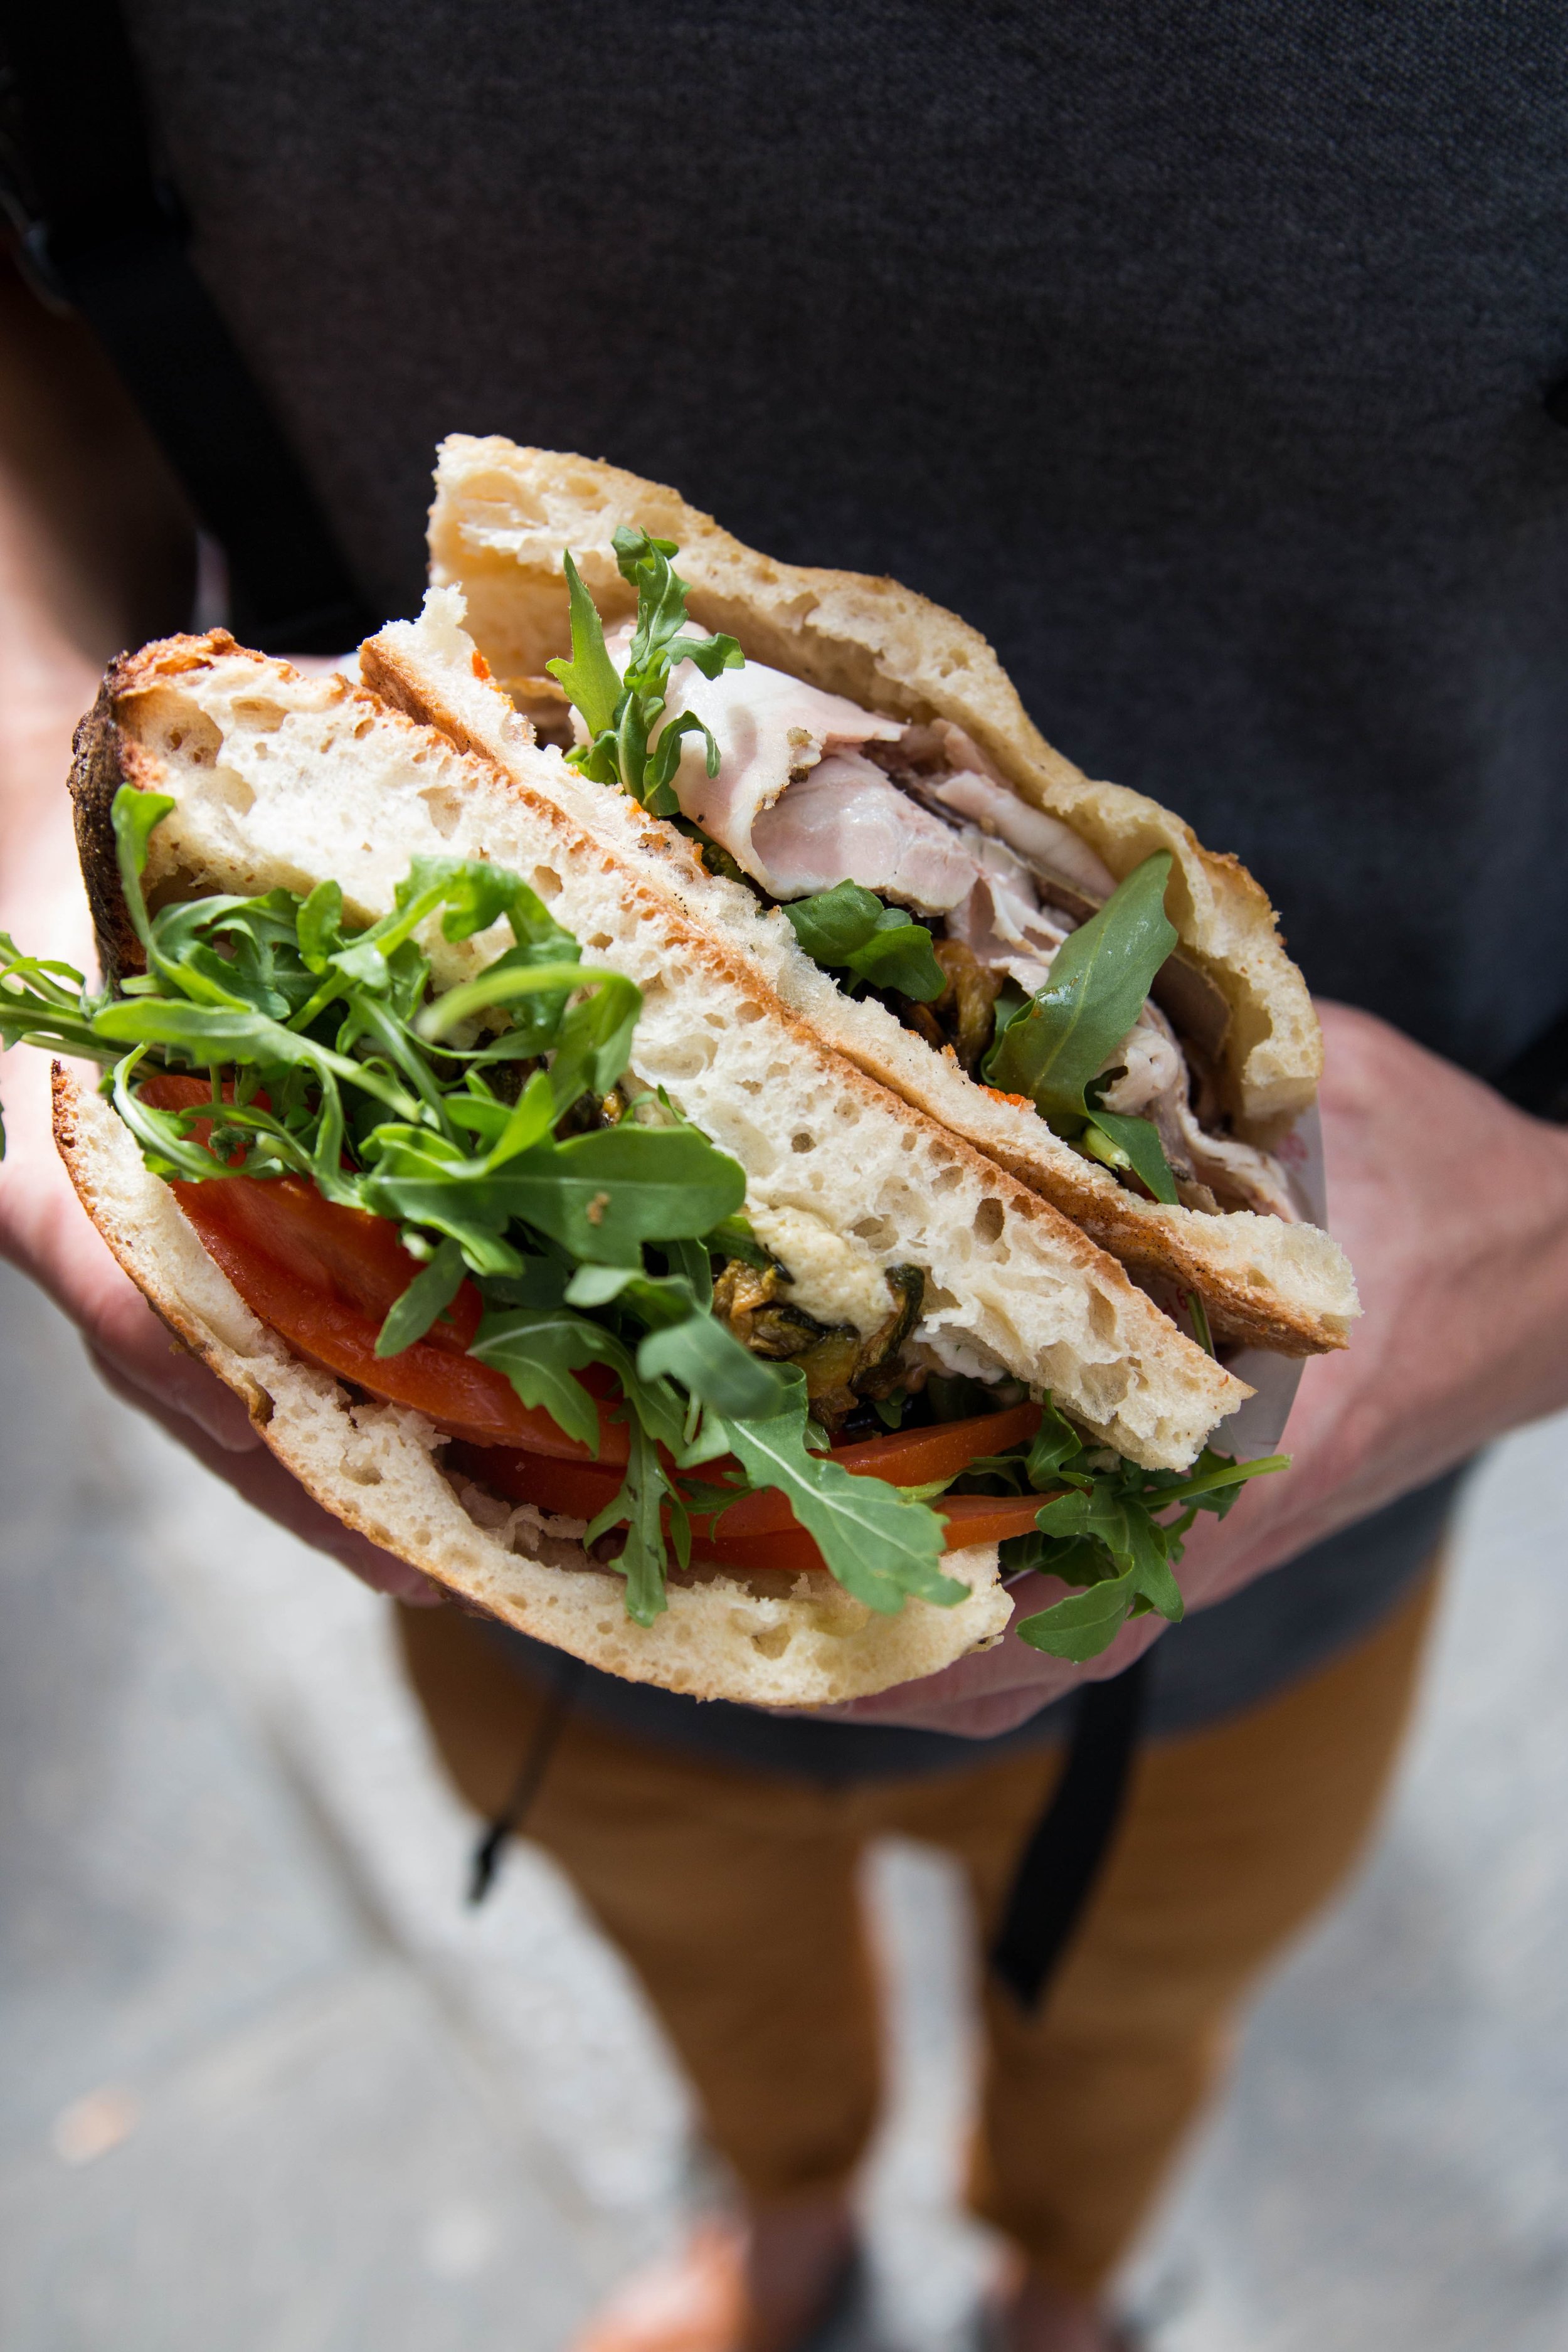 Sandwich from All'Antico Vinaio